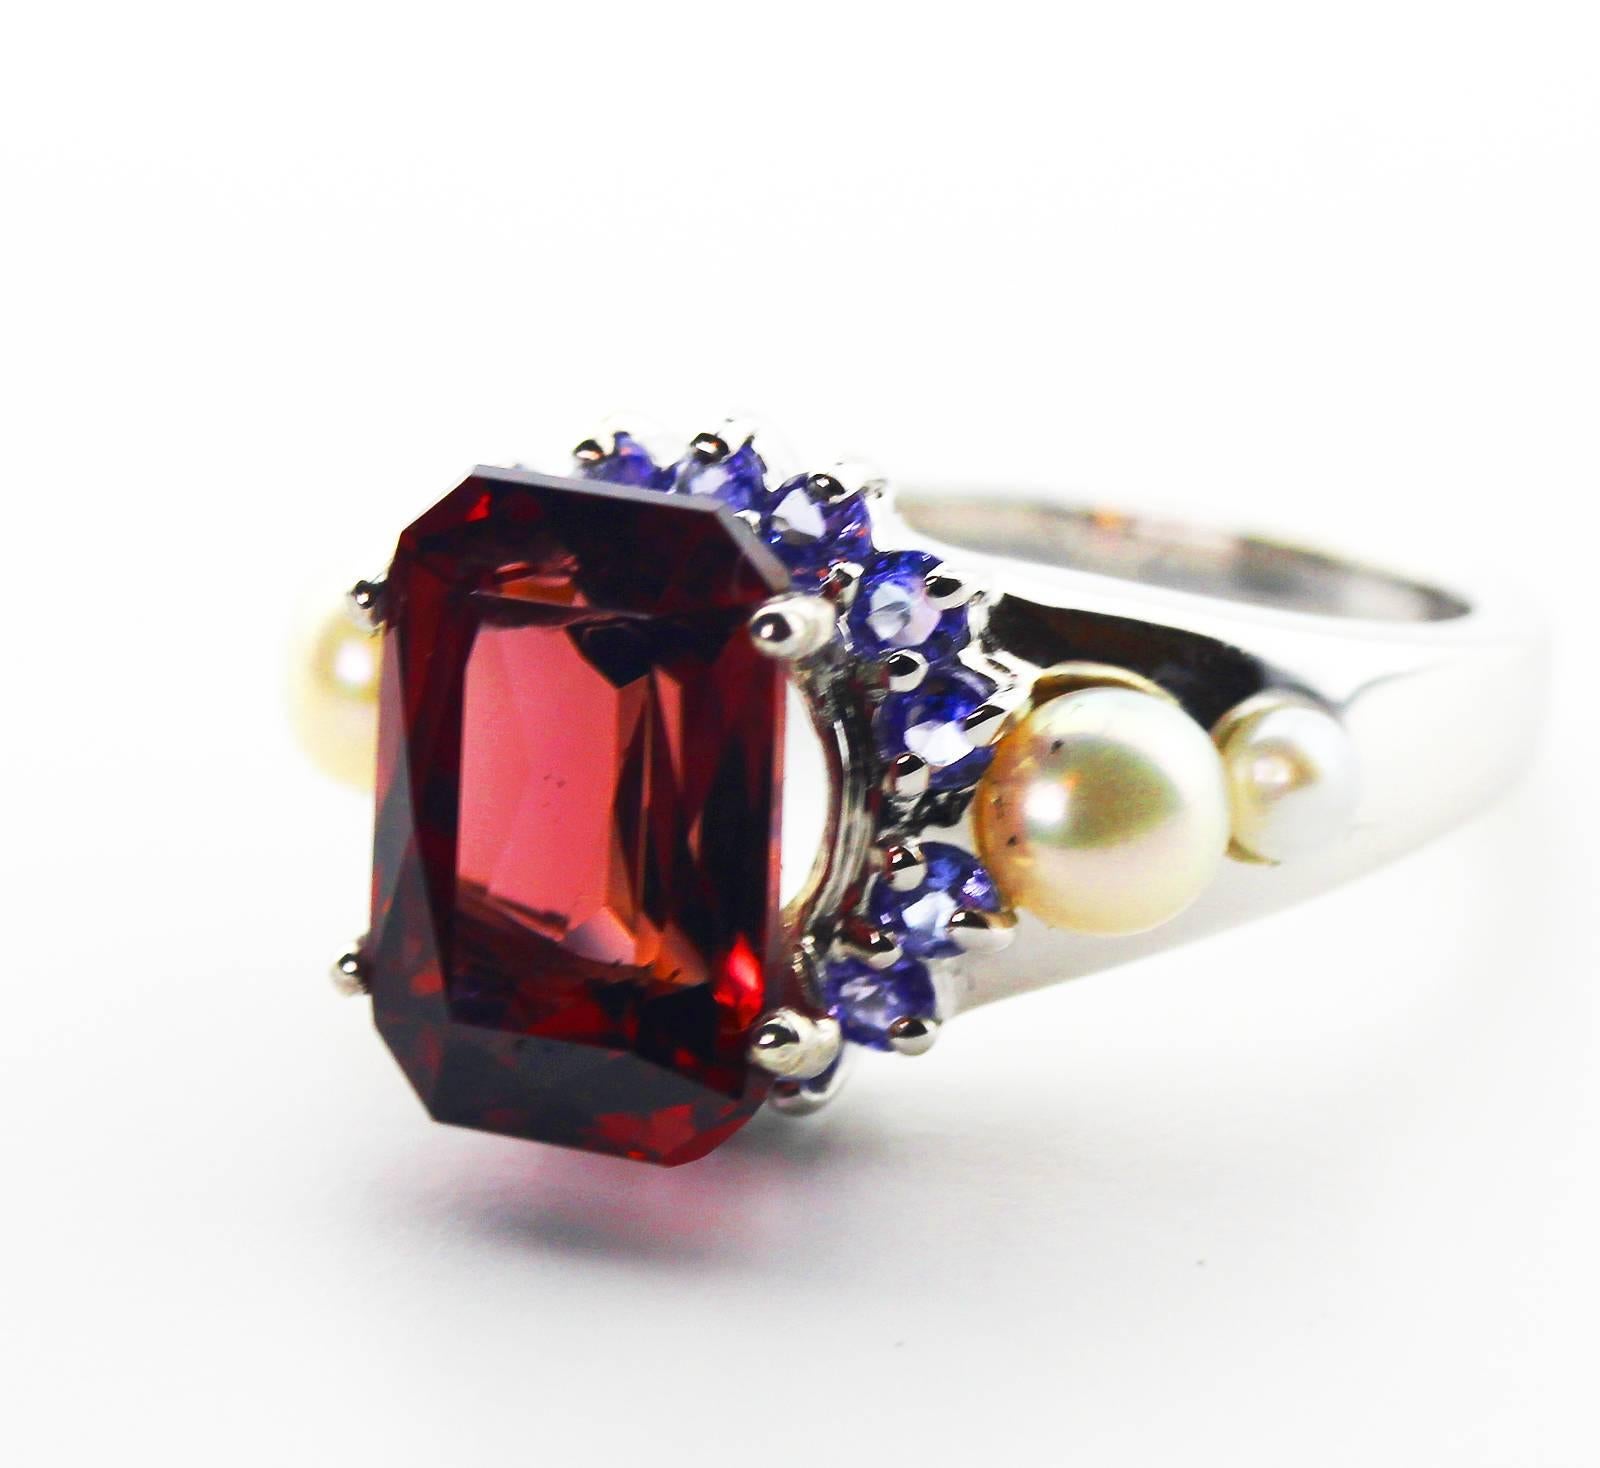 Artisan AJD Elegant 7.2 Ct Brilliant Red Zircon, Sapphire, Pearl Sterling Cocktail Ring